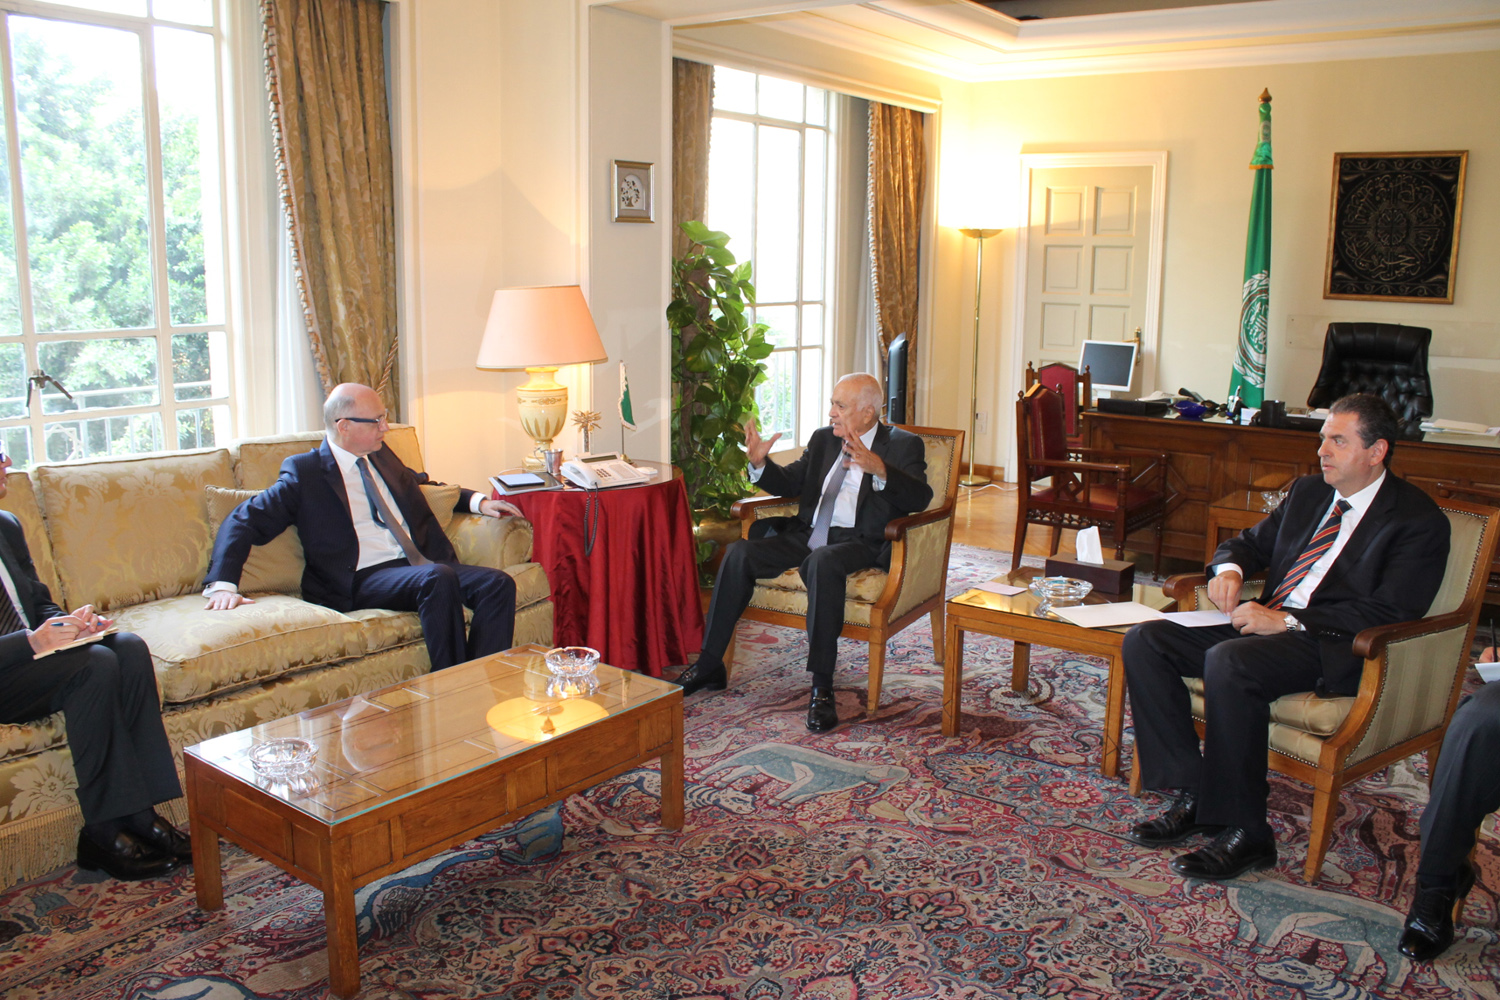 Arab League Secretary General Nabil Al-Araby during the meeting with Argentine's visiting Foreign Minister Hector Timerman